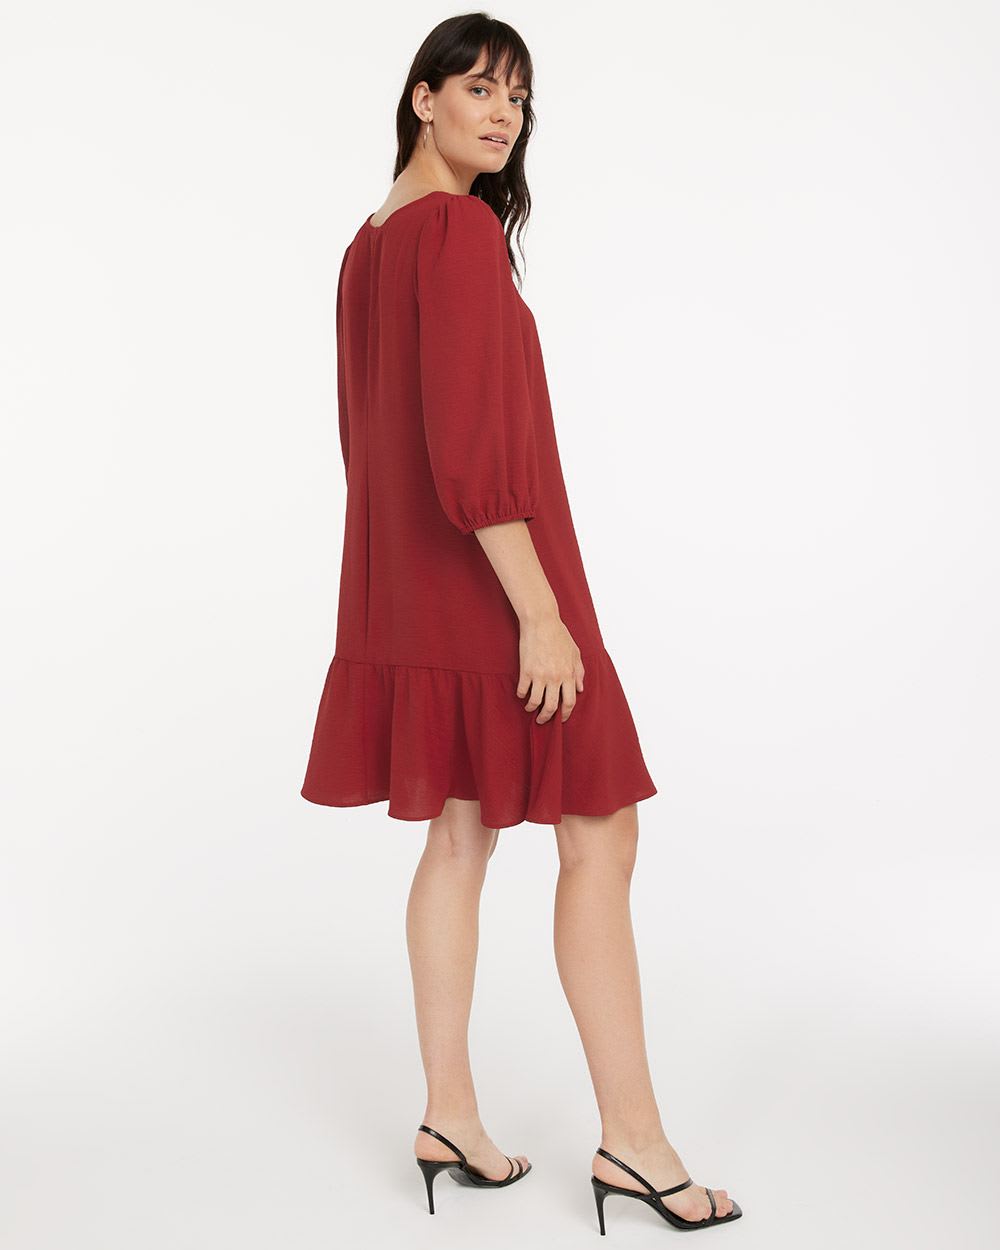 Midi Dress with Puffy Sleeves and Ruffled Hem, Connected Apparel